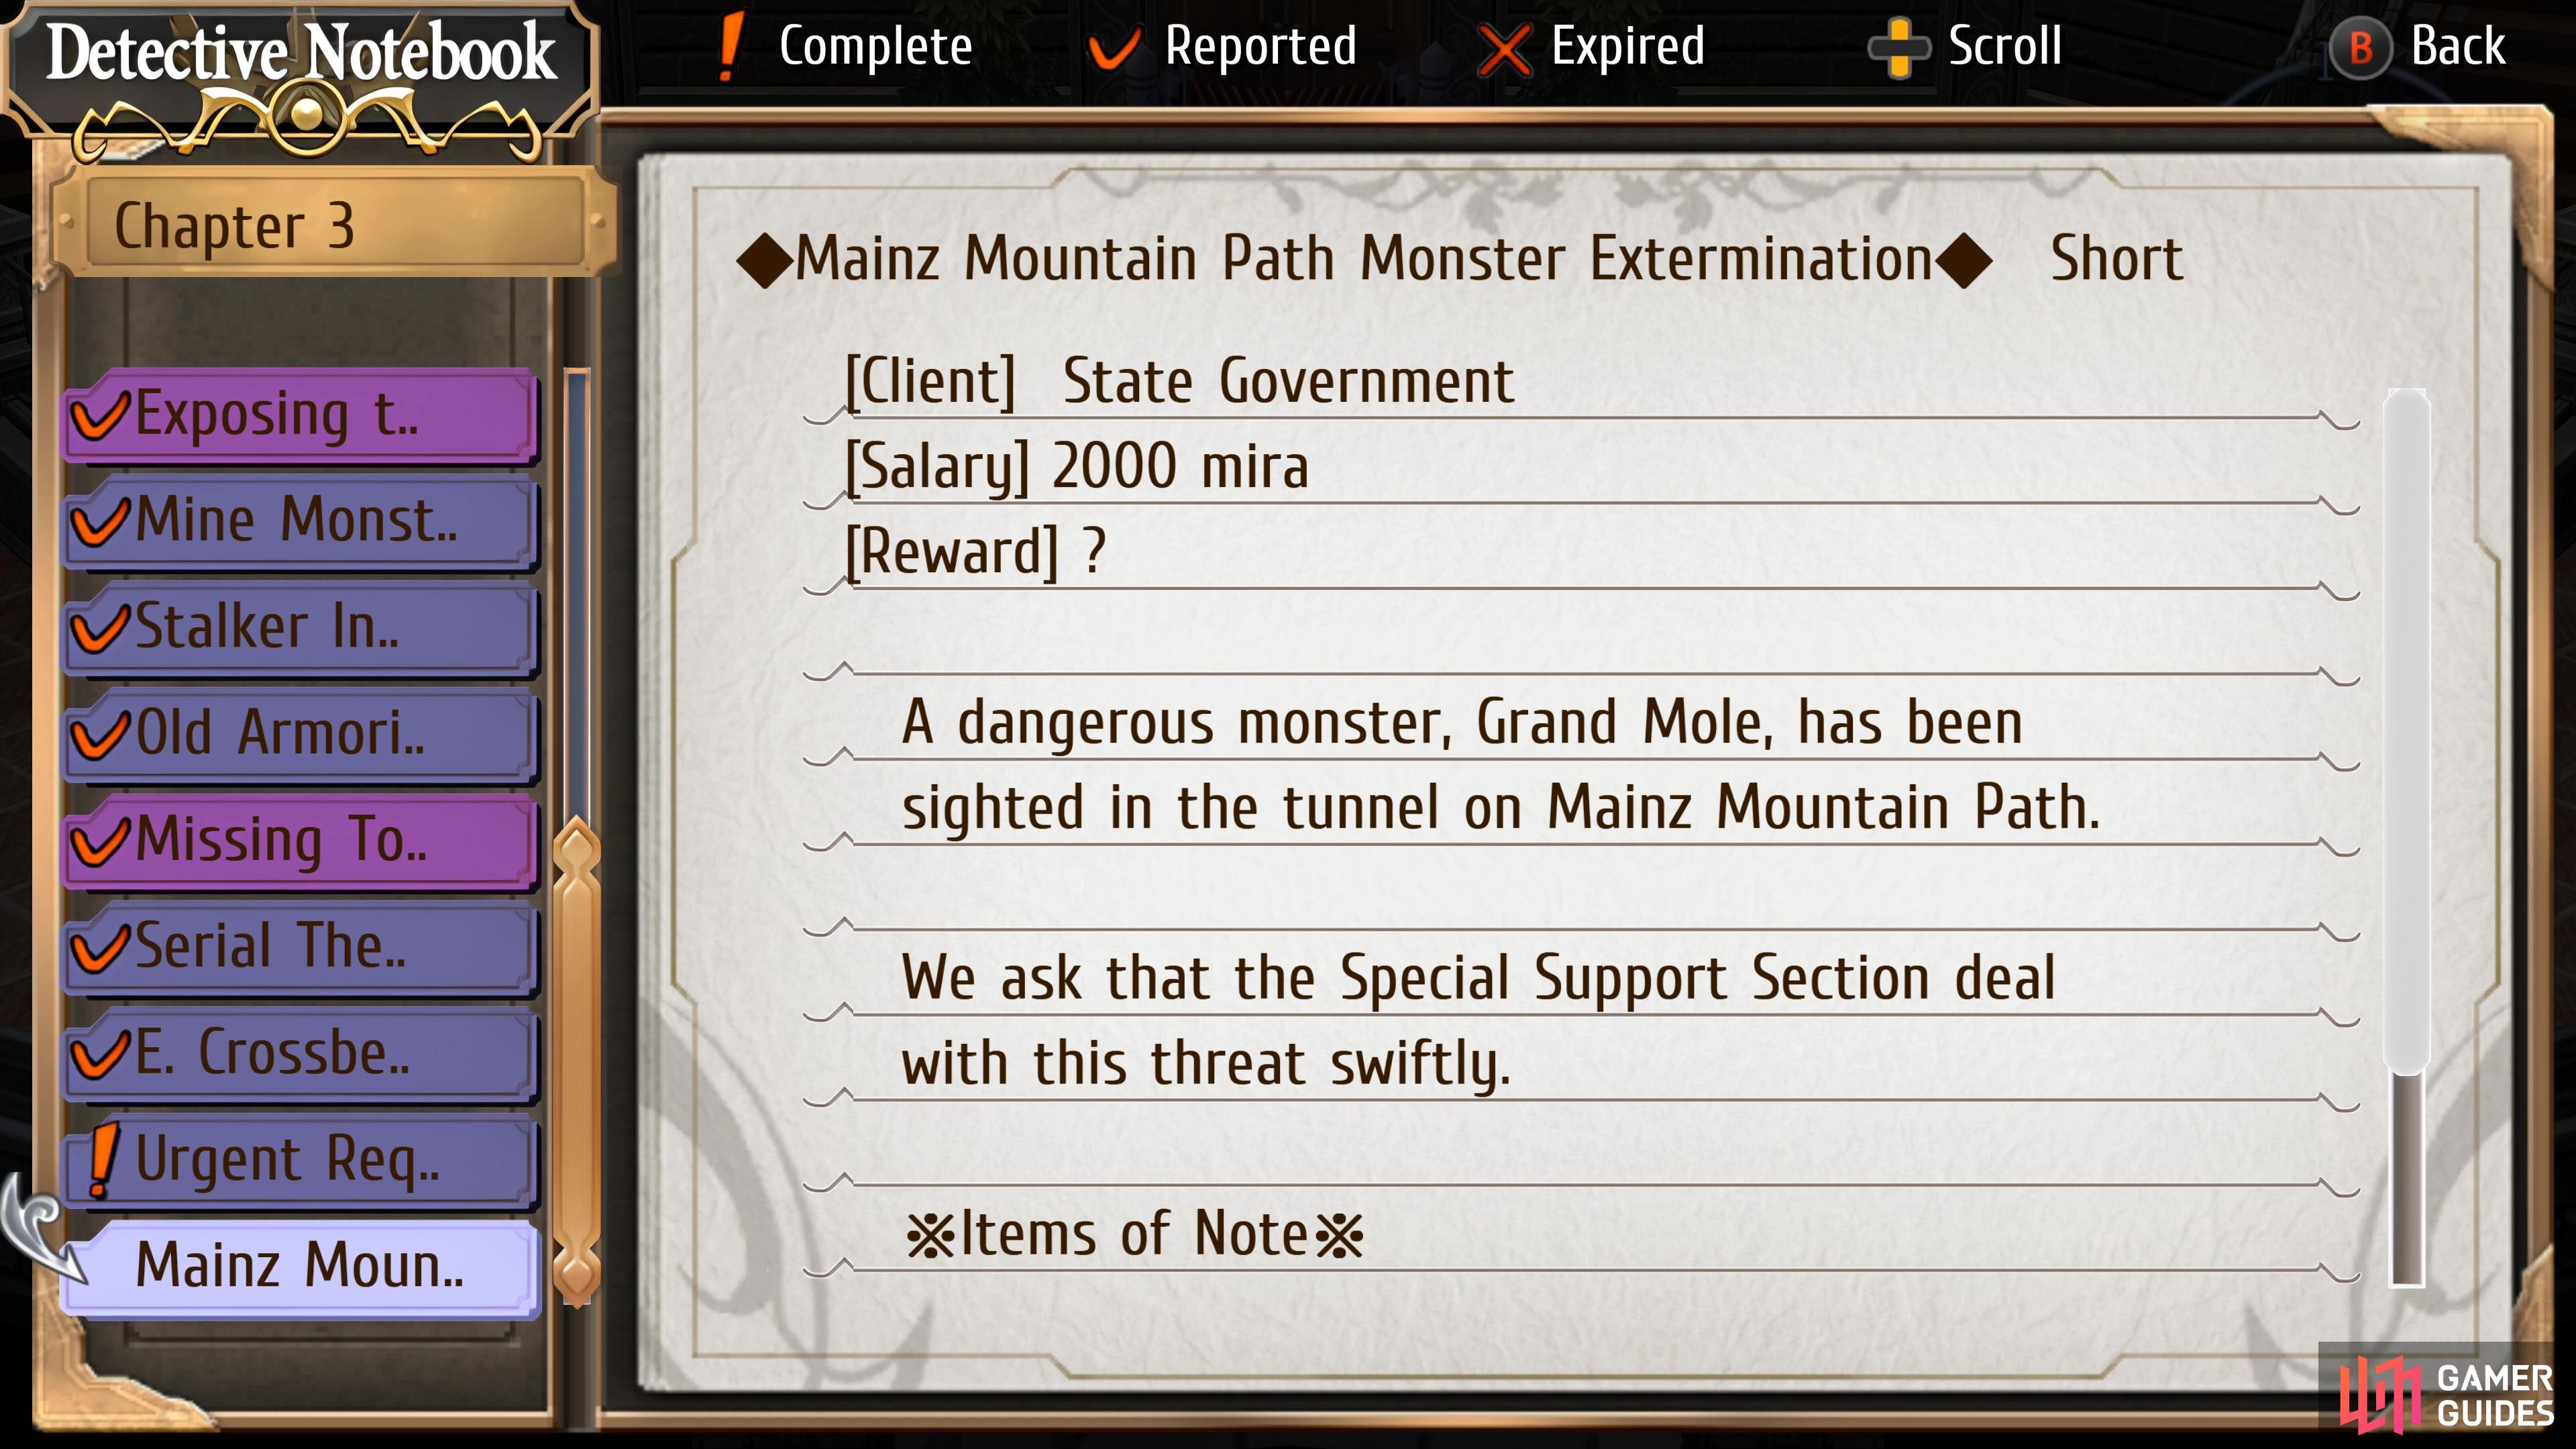 Mainz Mountain Path Monster Extermination is a Request on Chapter 3 Day 4.